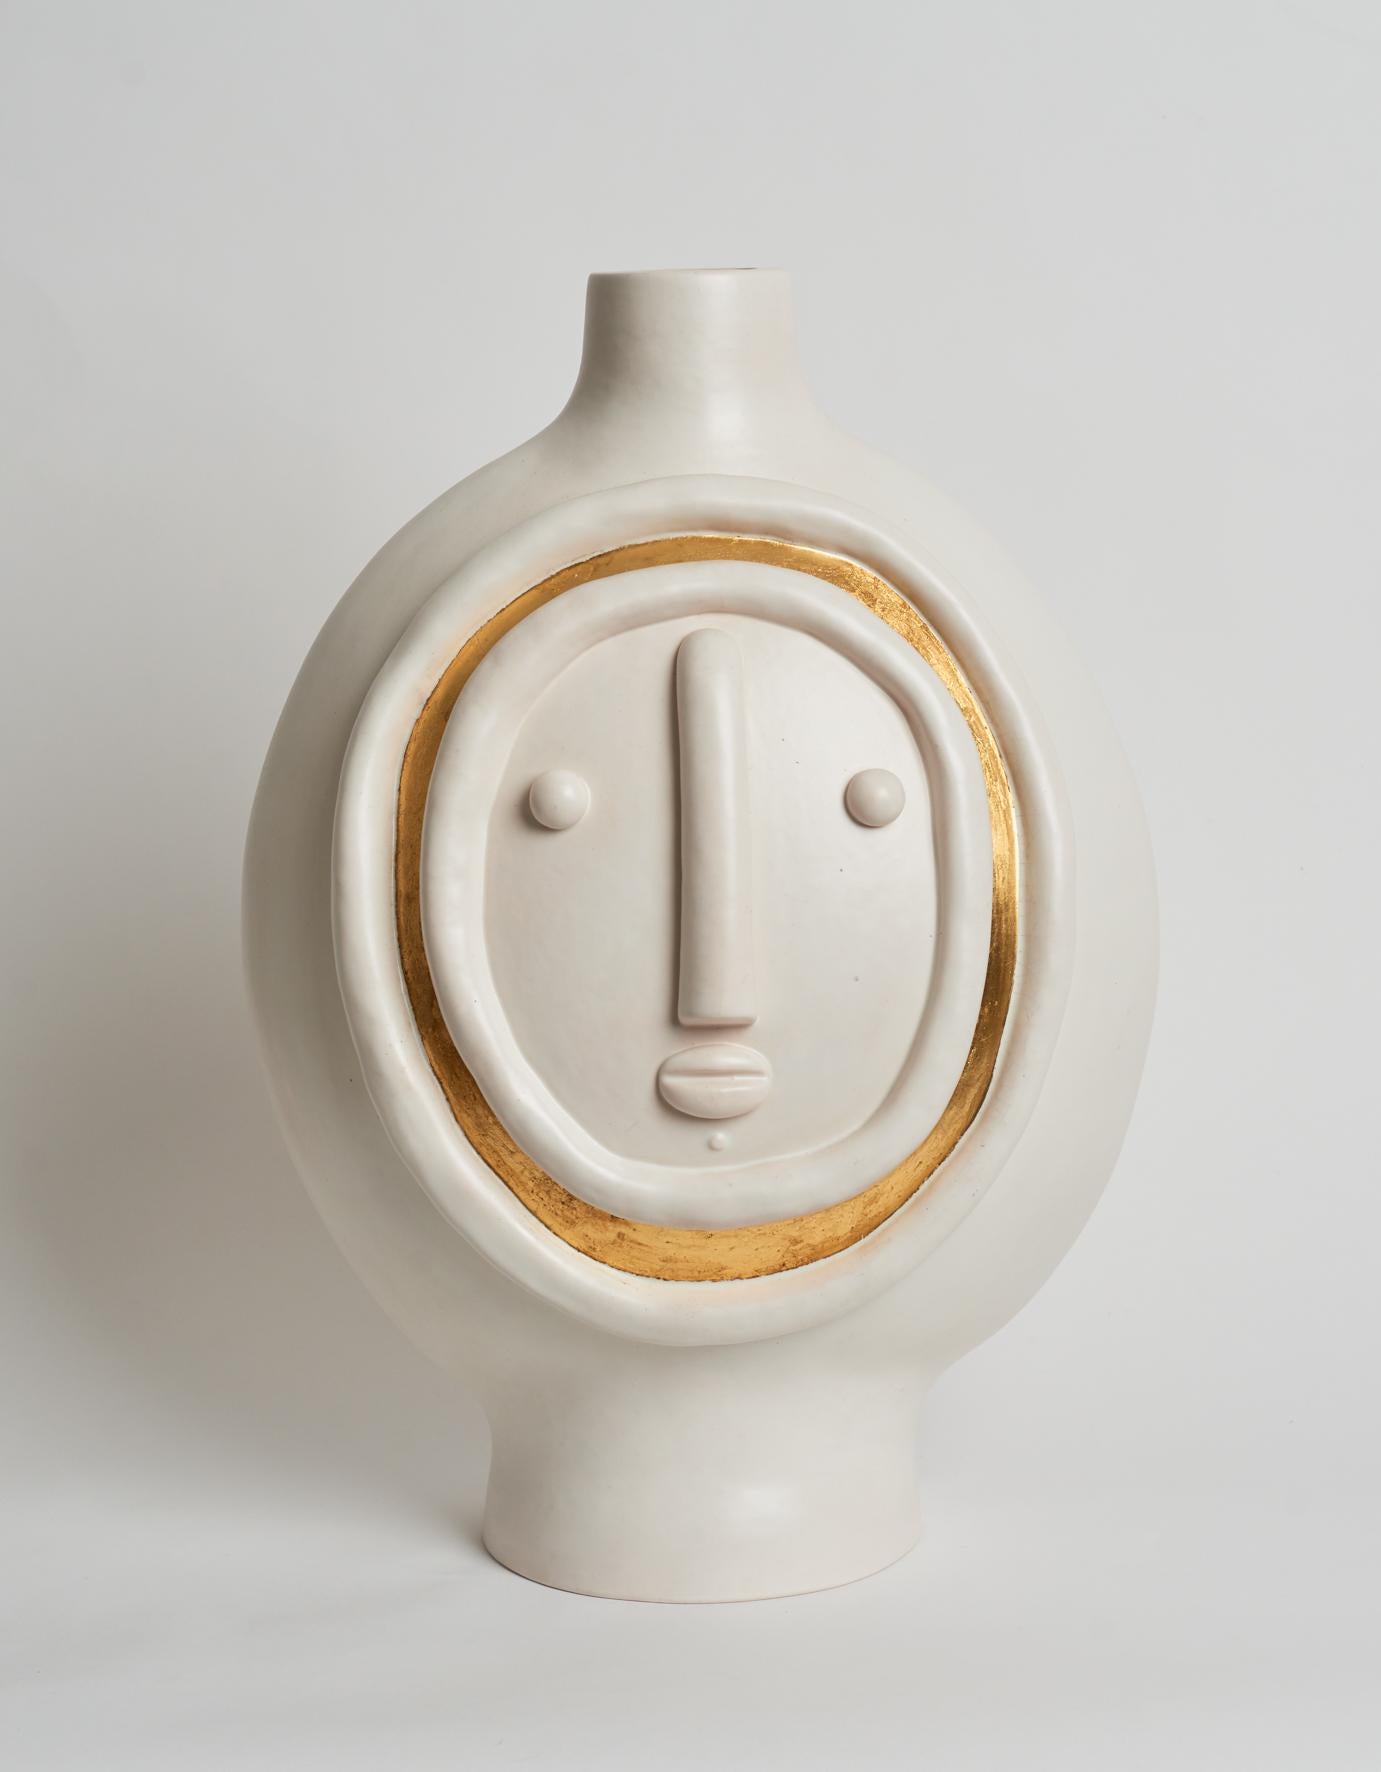 Hand-sculpted ceramic lamp base , white enamel with golden circle in front and ivory square face on back.

One of a kind stoneware piece glazed in white enamel signed by the French ceramicists Dalo 

The height dimension is for the ceramic